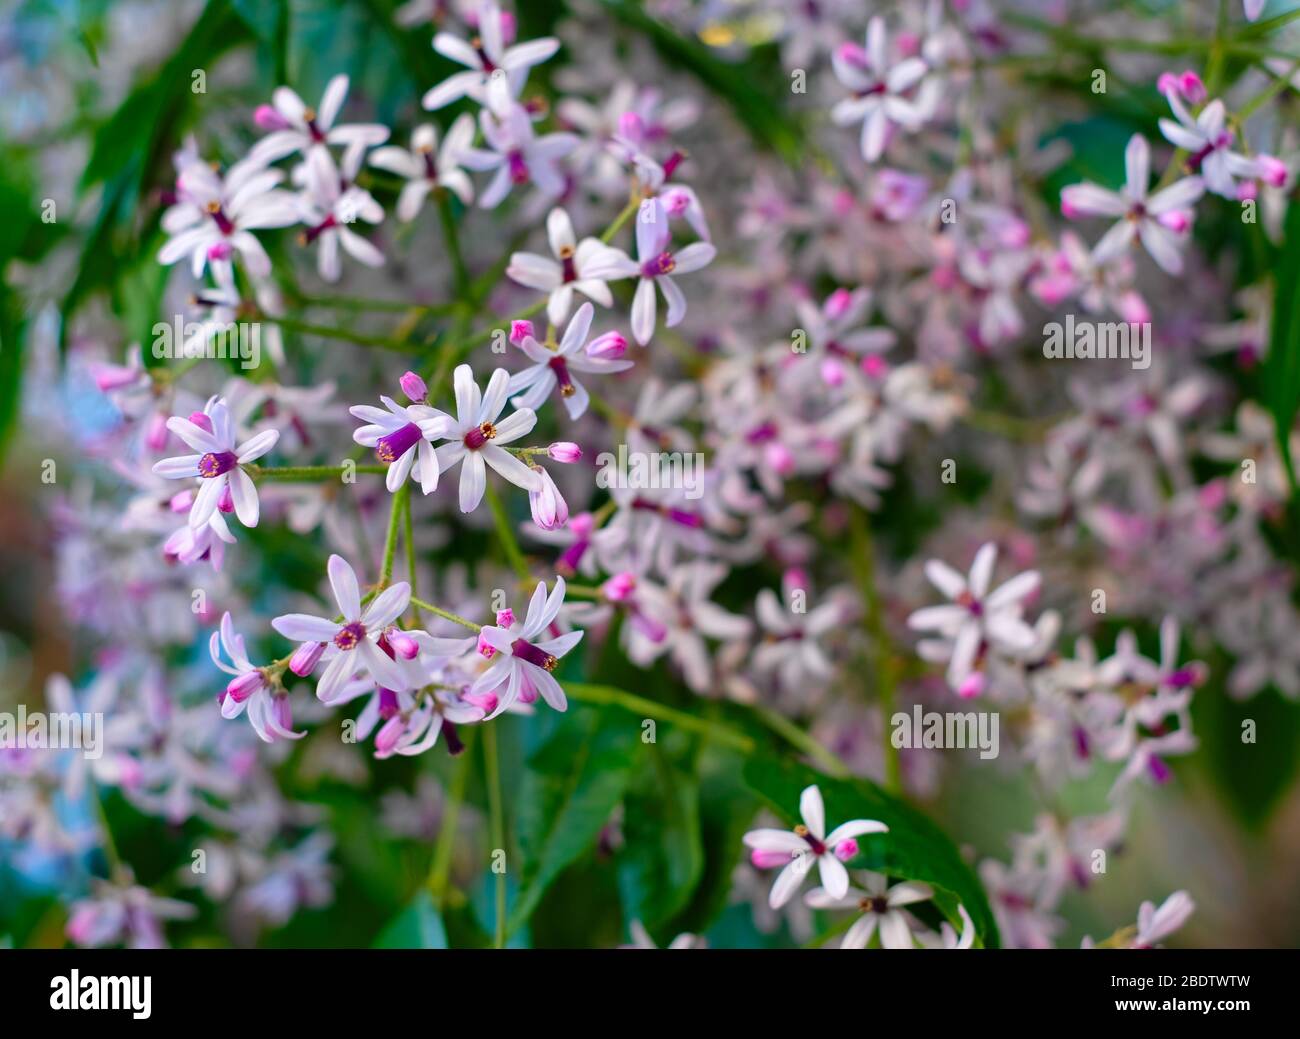 Many small pale flowers on soft green floral background. Stock Photo